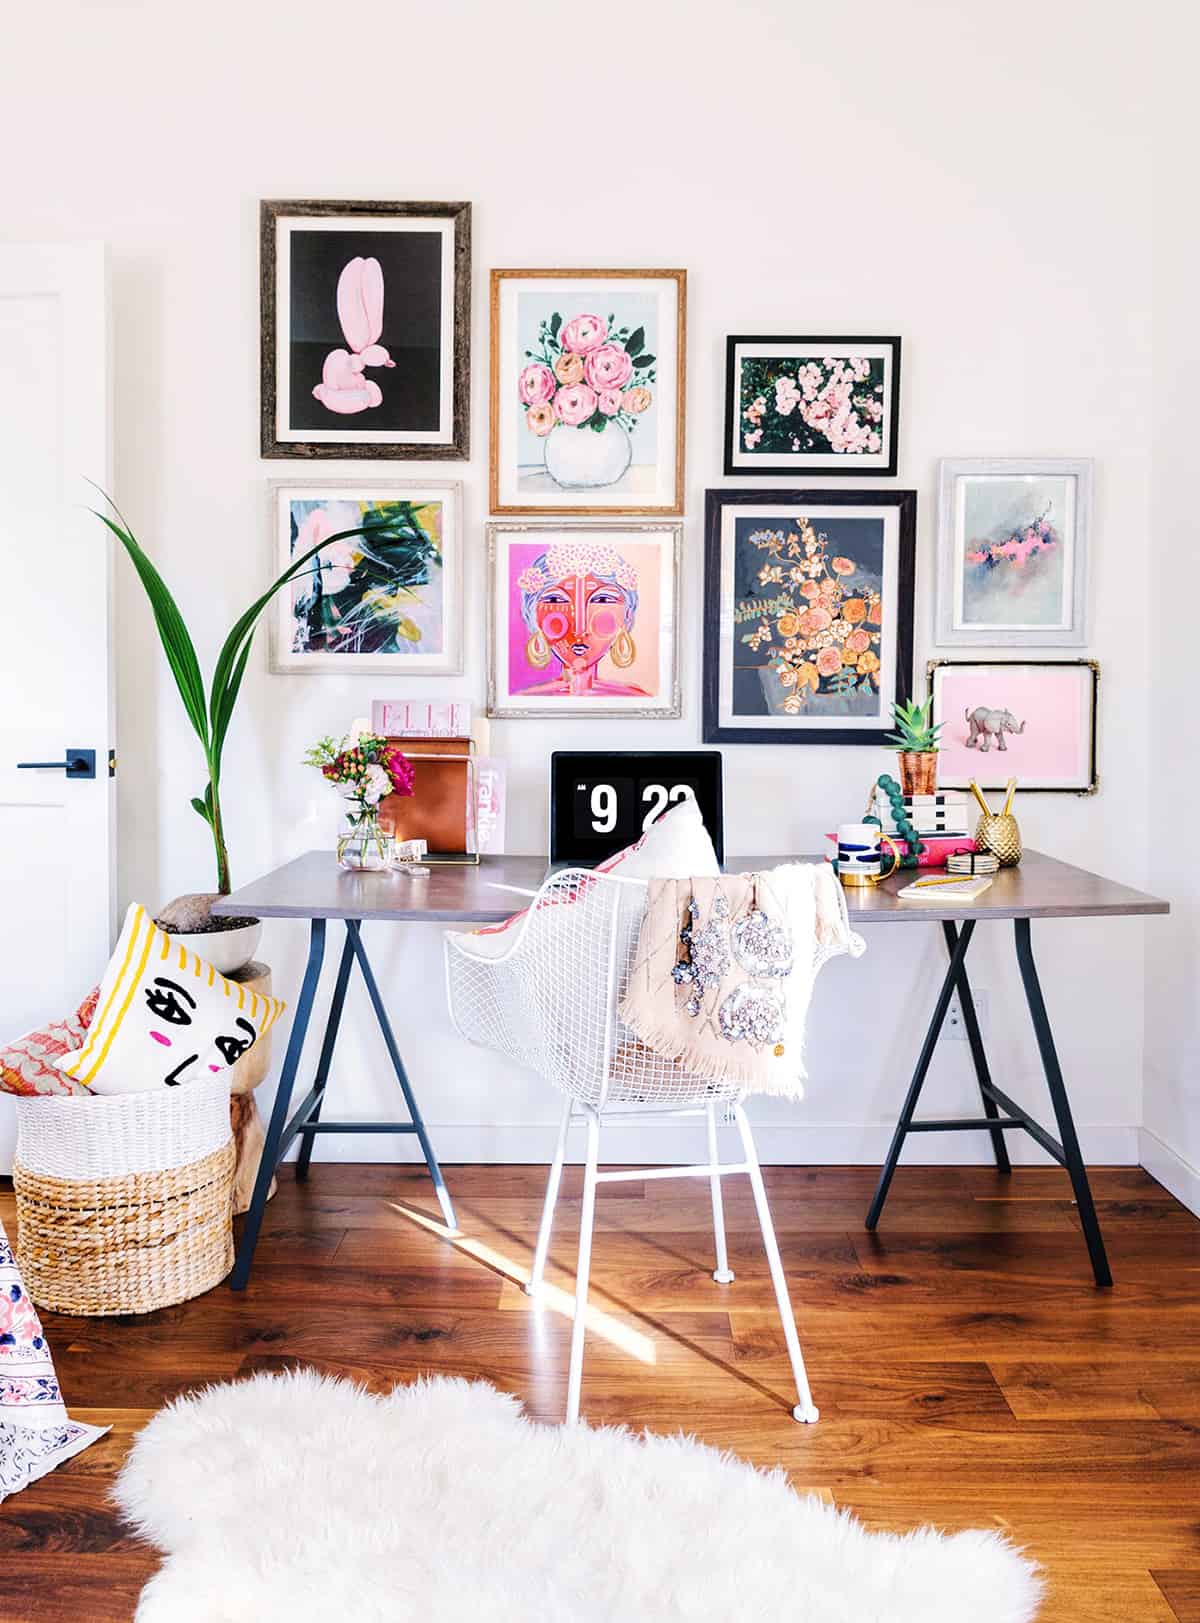 Small Home Office Ideas That Will Make You Want to Work Overtime #bohostyle #deskstyle